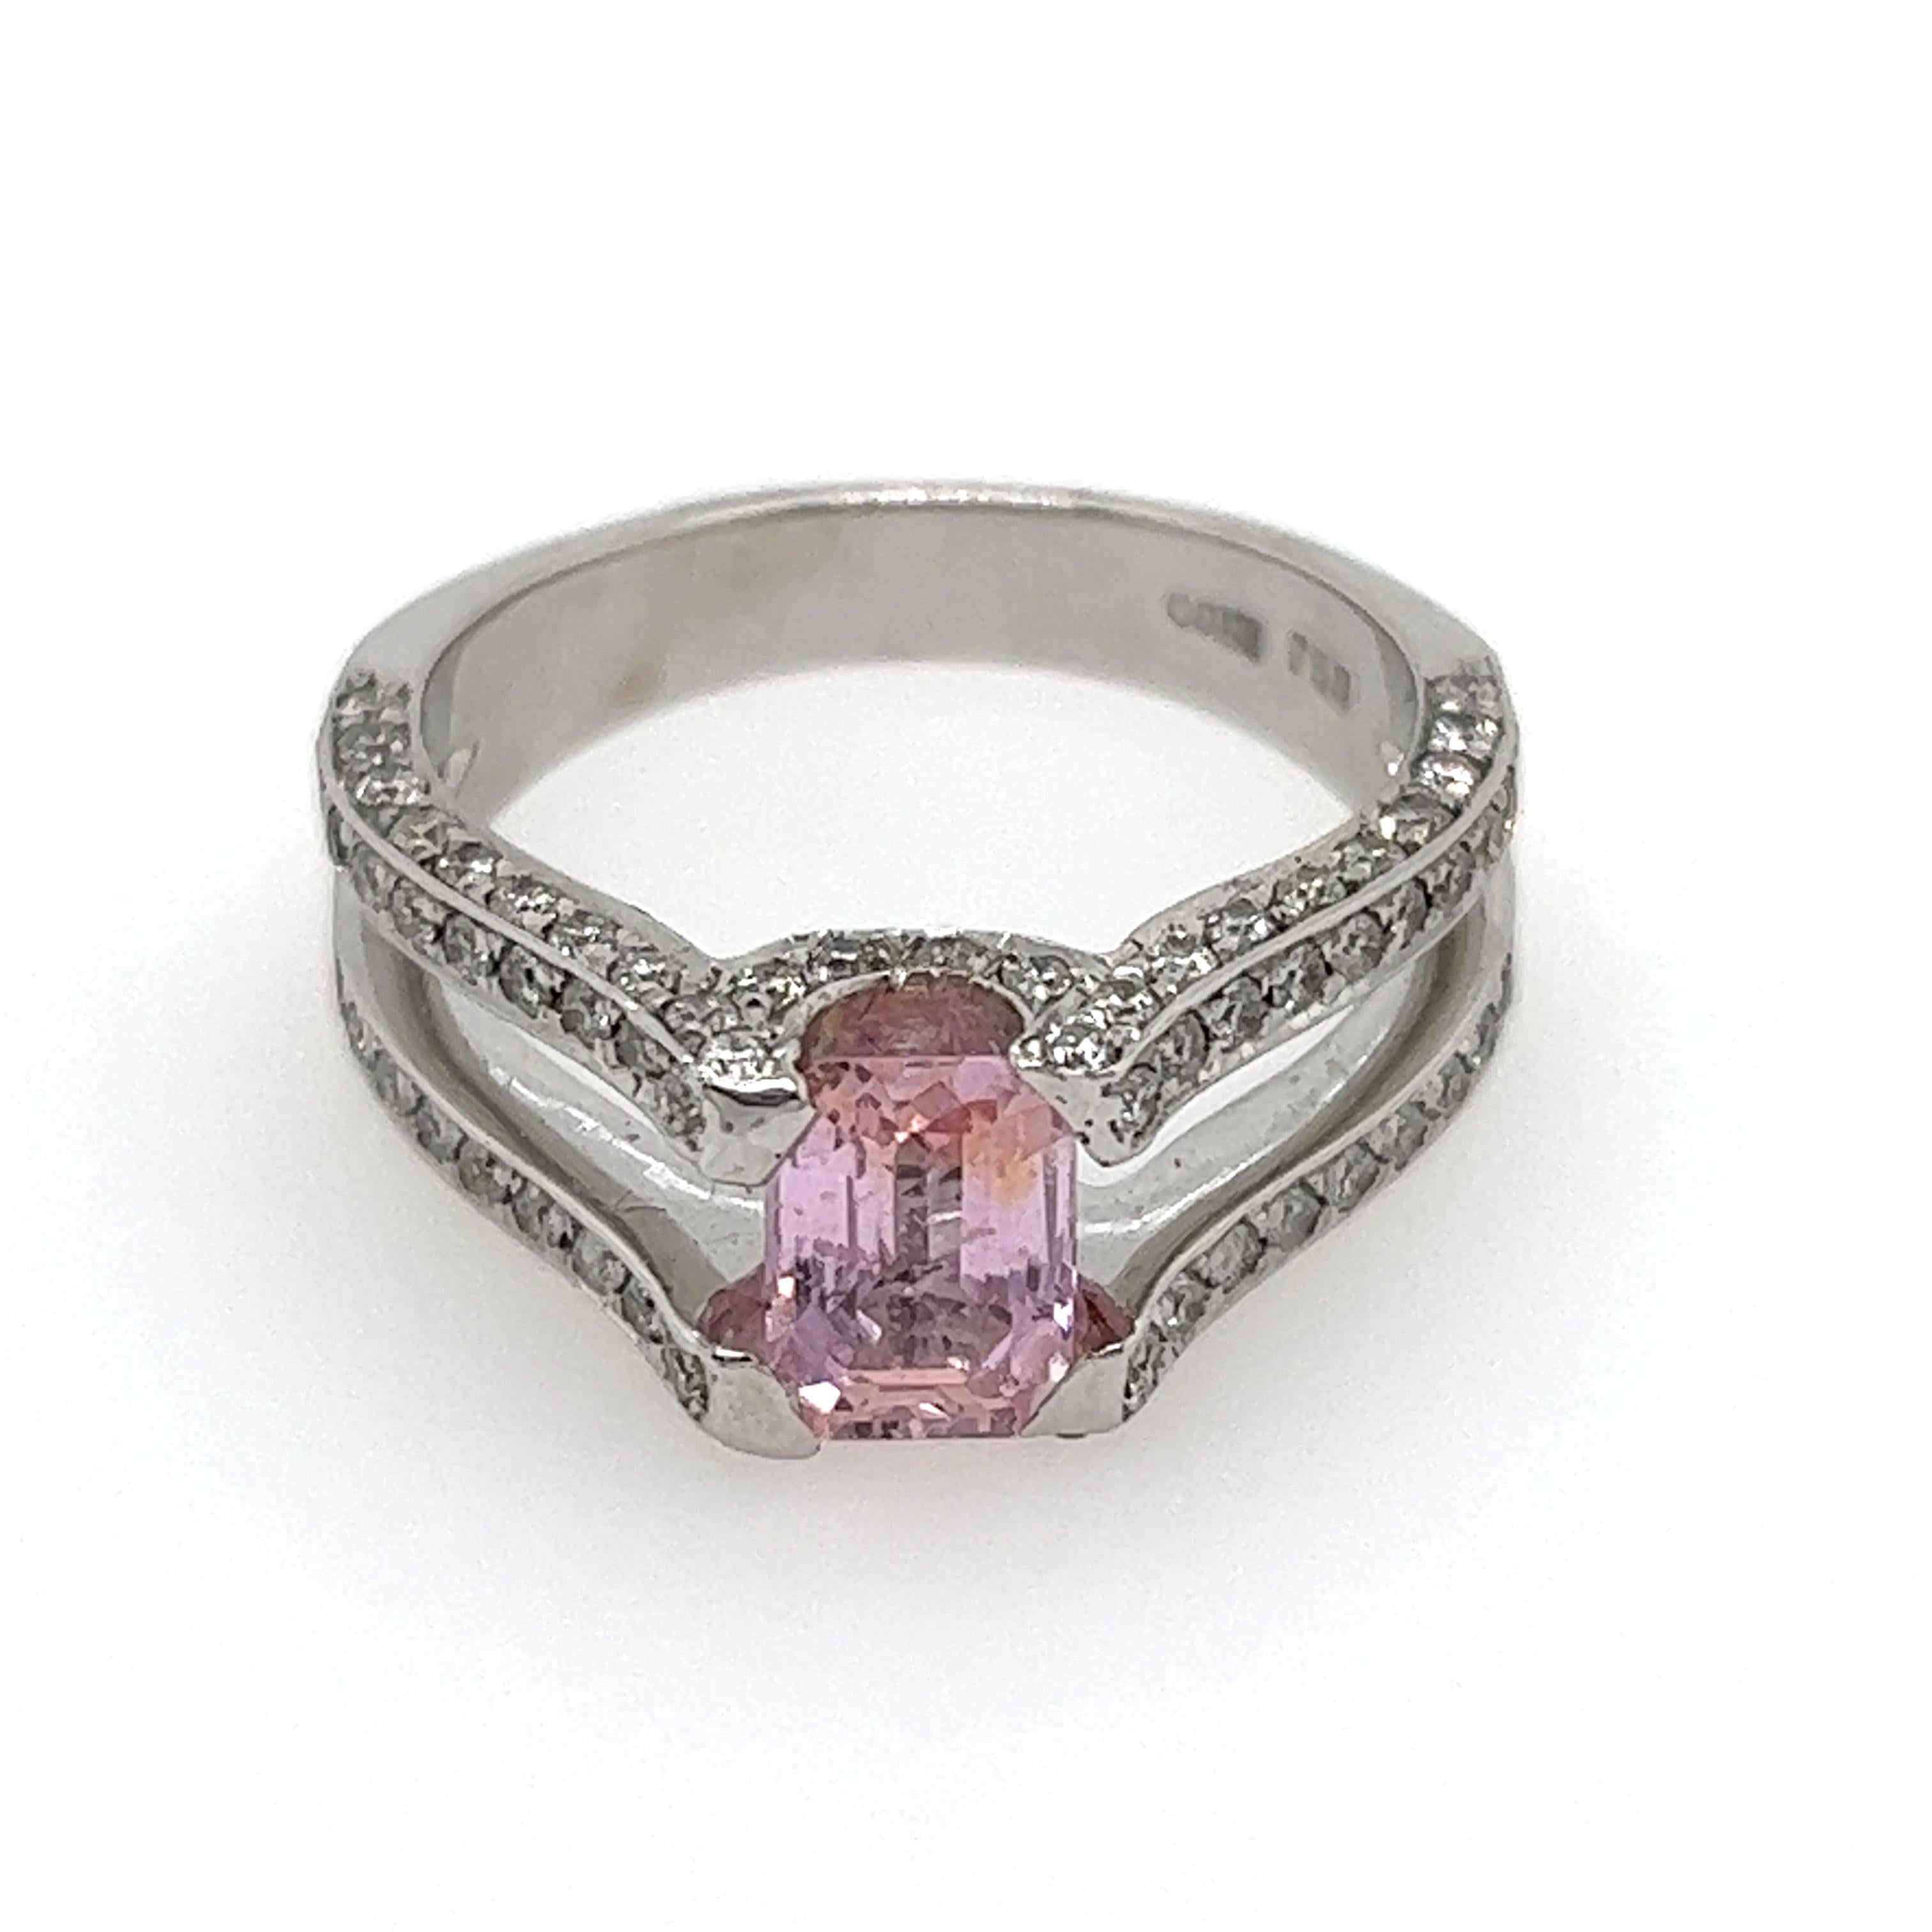 This ring features a dainty 1.01 carat Natural Pink Sapphire at its centre. This baby pink emerald cut stone is set in a claw setting on a flawless 18K White Gold band, its gentle hues brought out by the band it sits on. 

Also on this band, on